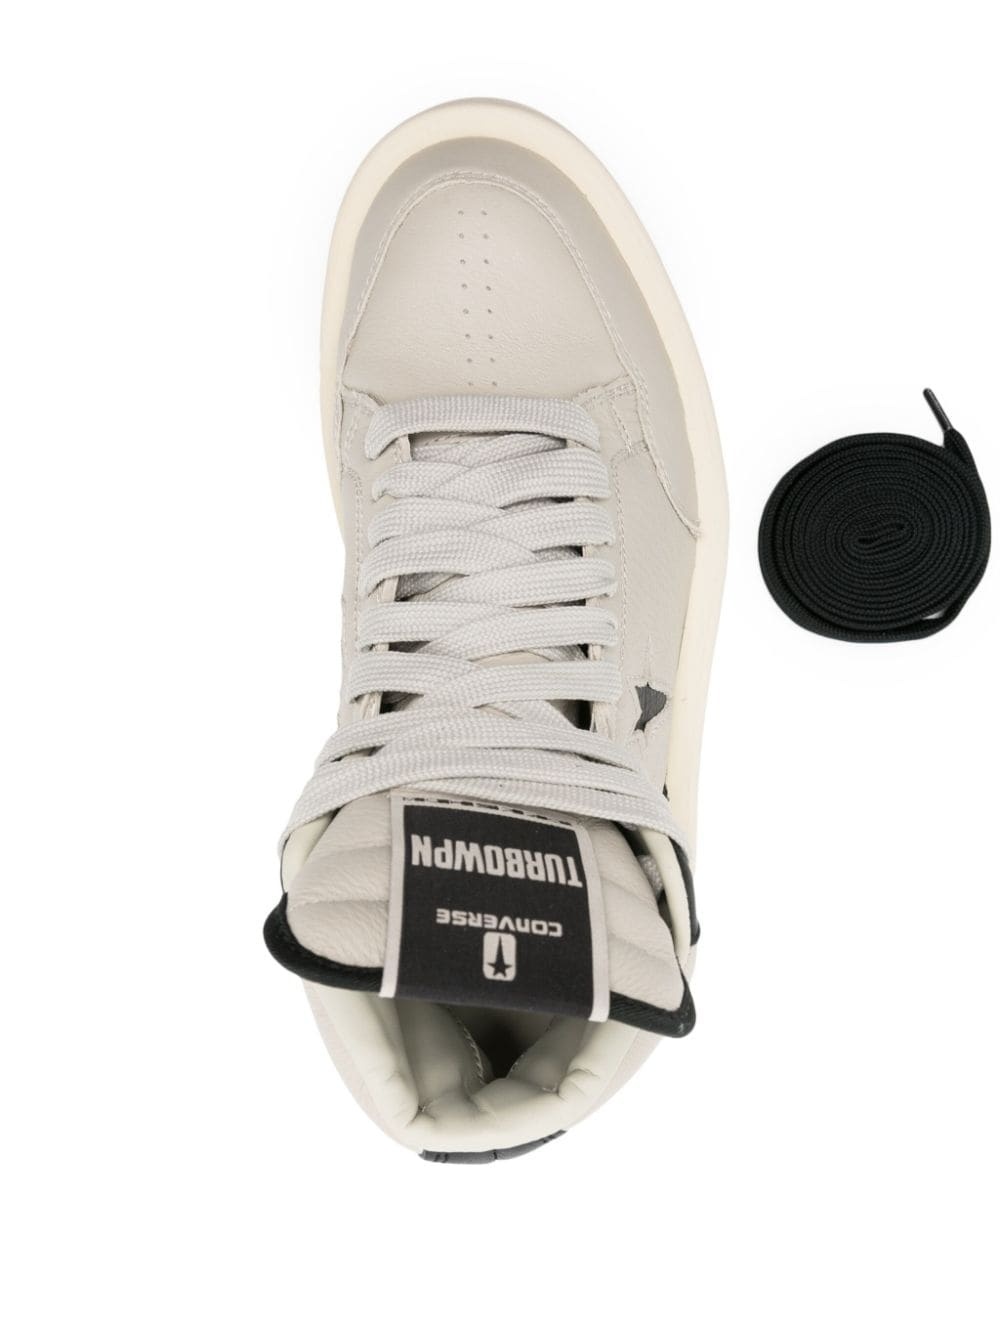 x Converse TurboWpn leather sneakers - 4